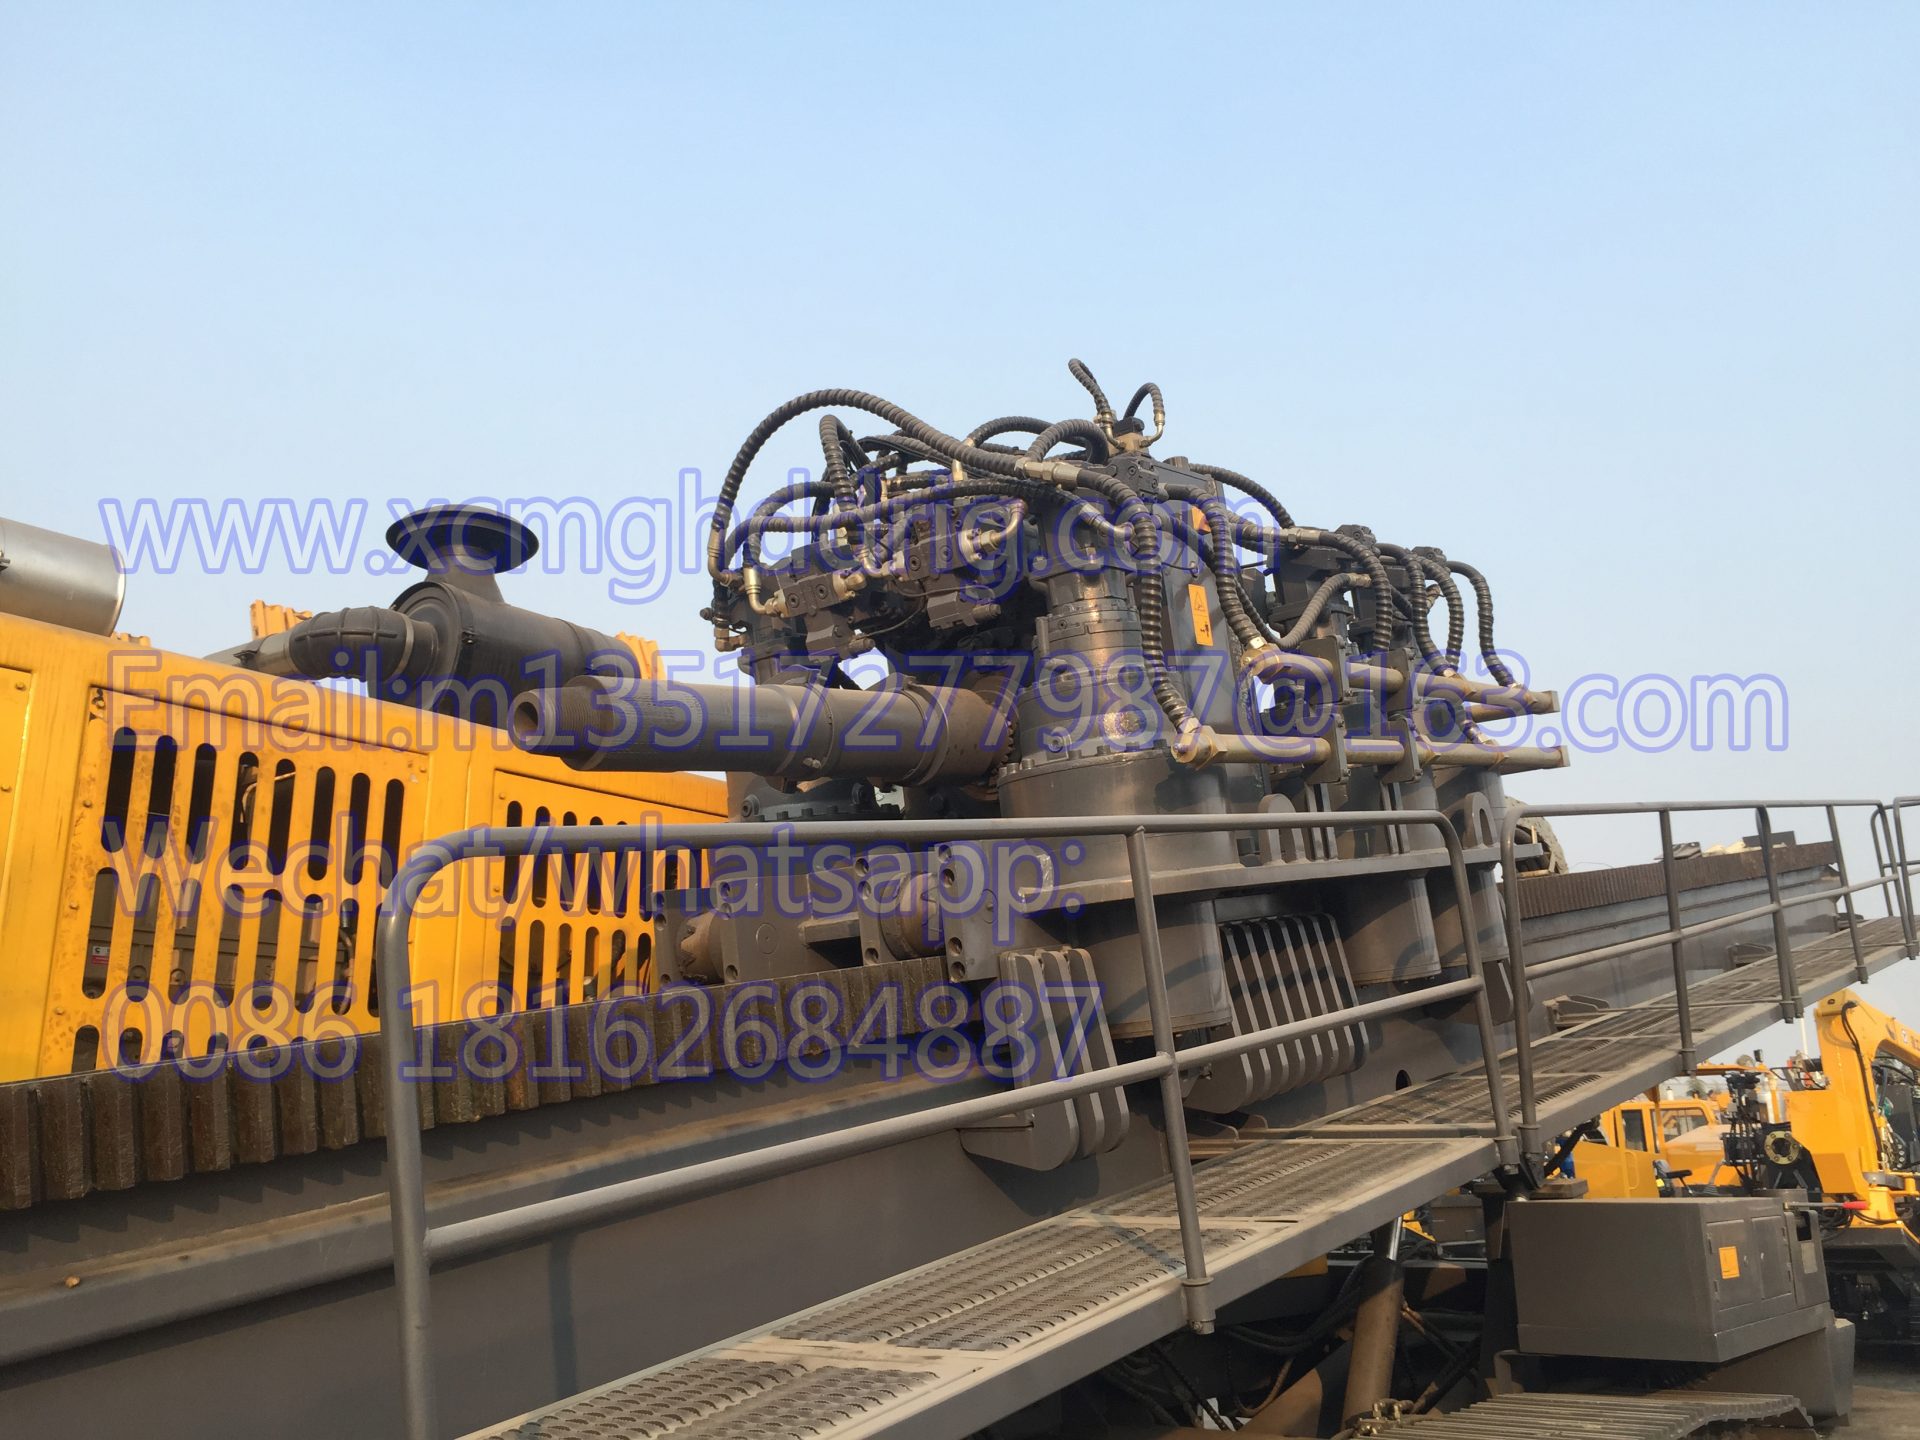 XCMG horizontal and directional drilling